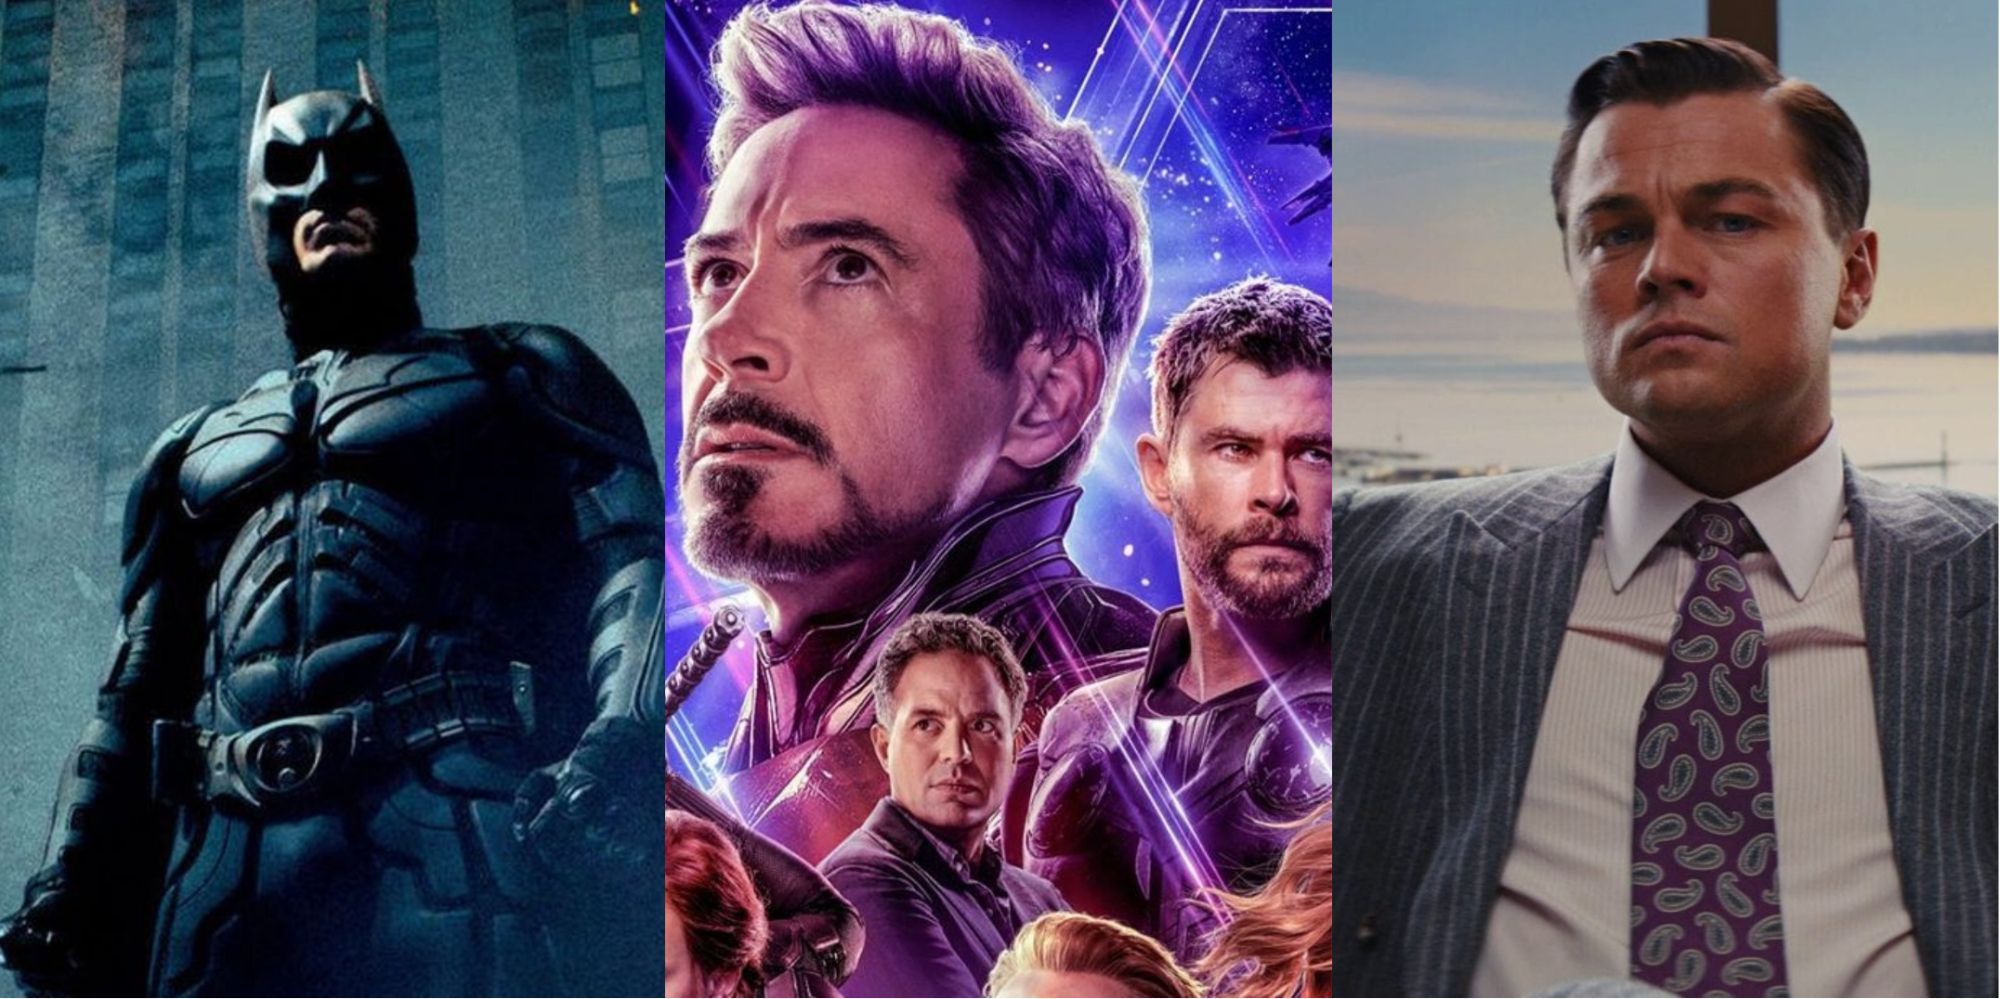 Stills from The Dark Knight, Avengers: Endgame, and Wolf of Wall Street